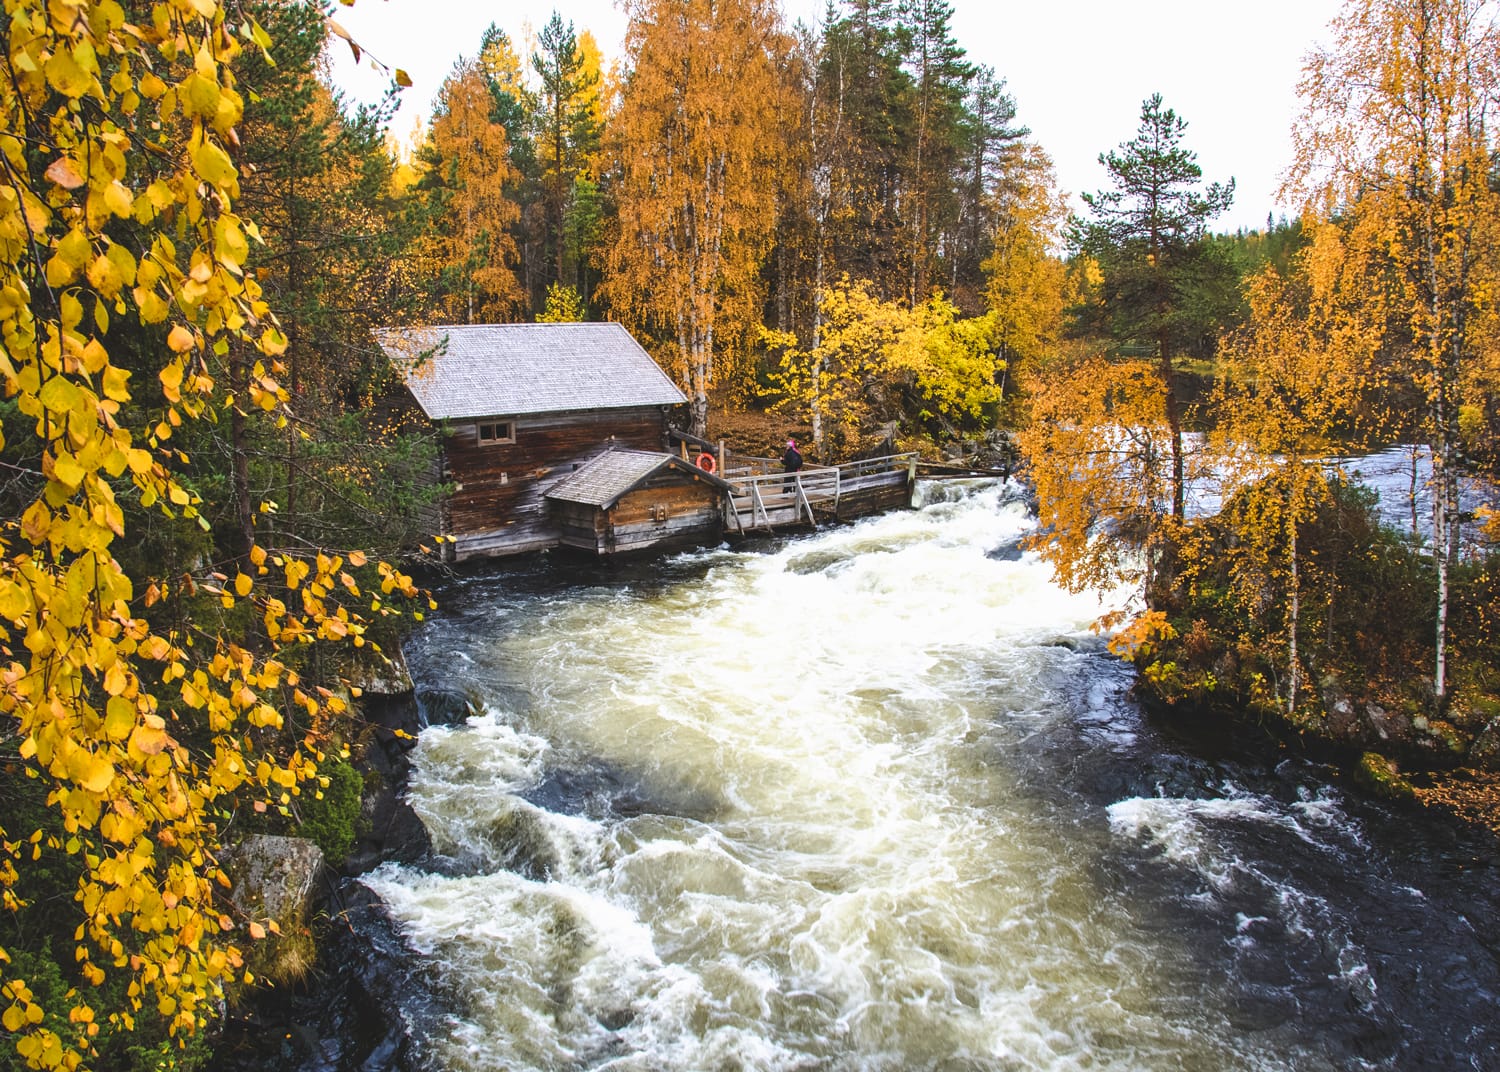 A public rest cabin in Karhunkierros trail during yellow autumn leaves in Oulanka National Park. Lapland, Finland.